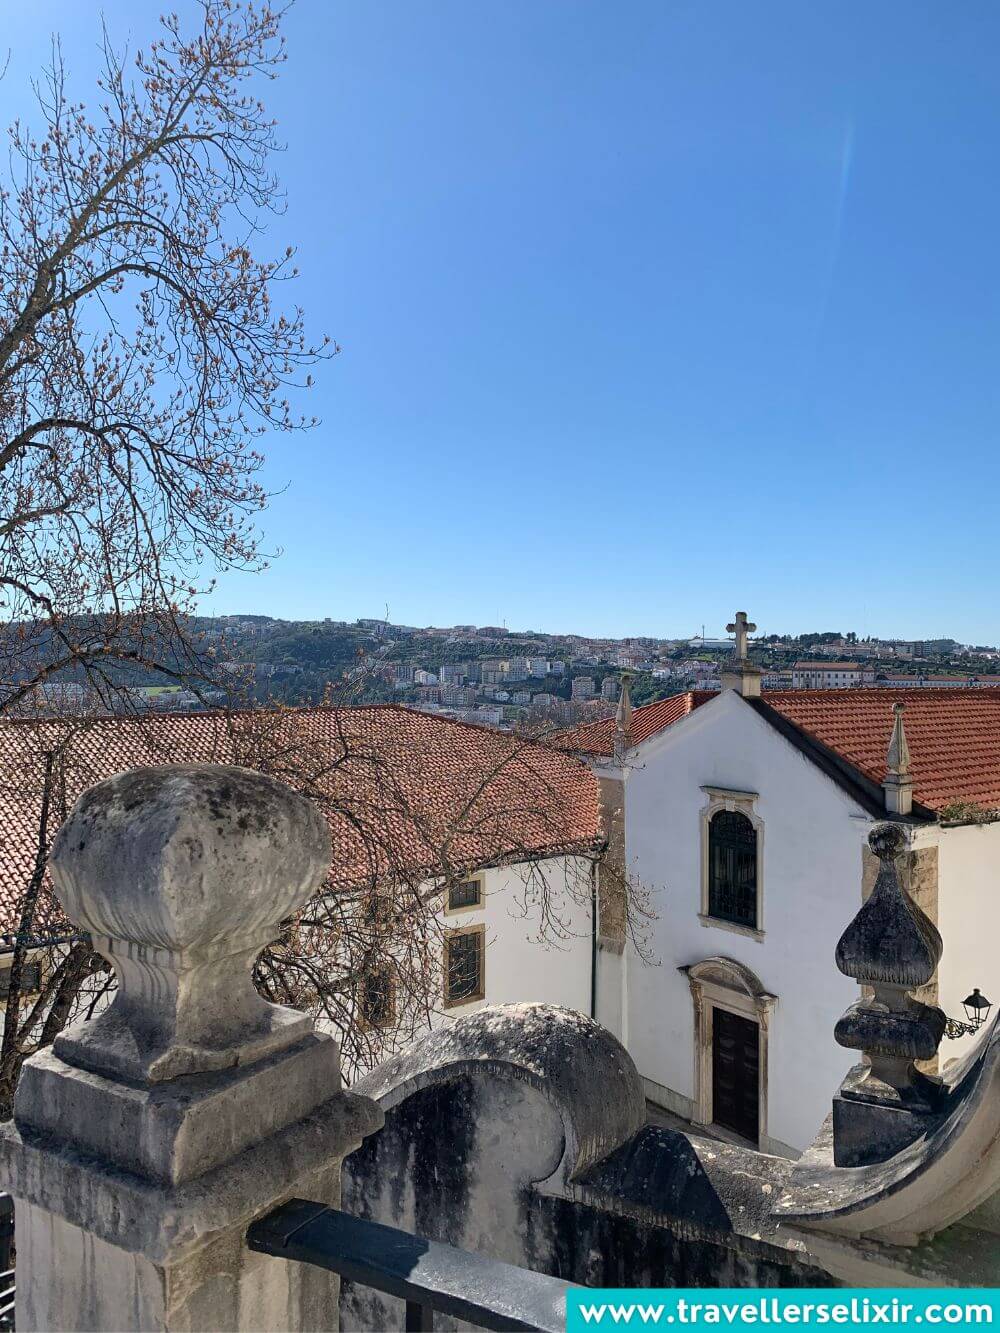 View of Coimbra from the University of Coimbra in Alta.